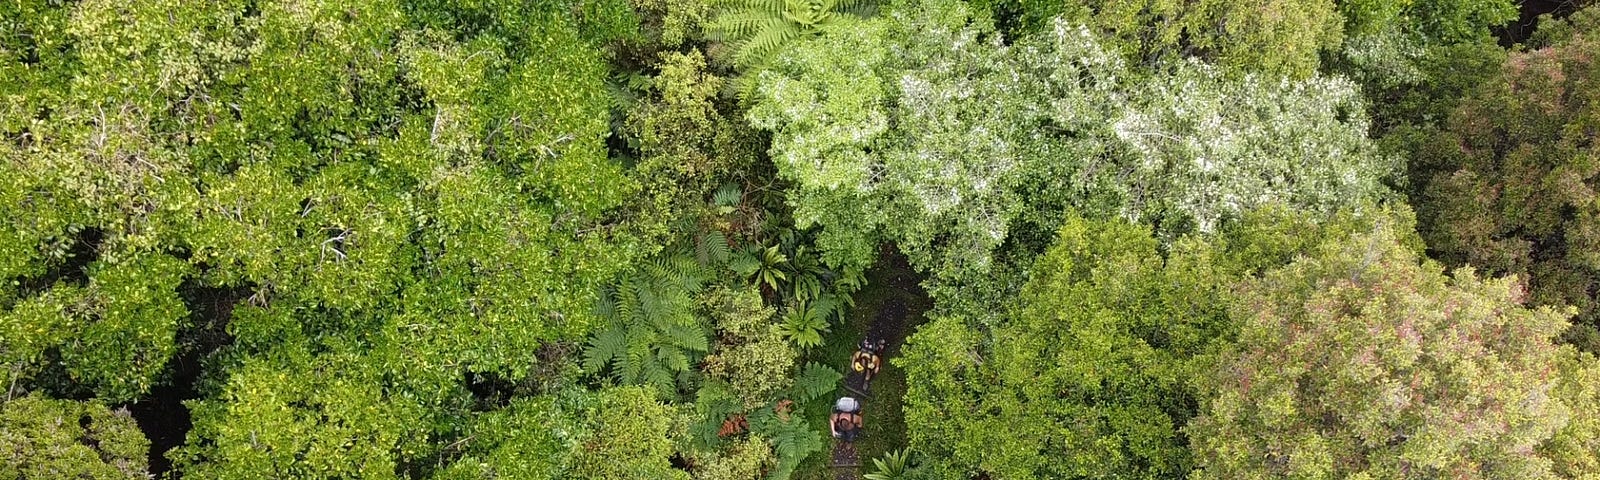 Two people walking through the lush forest.